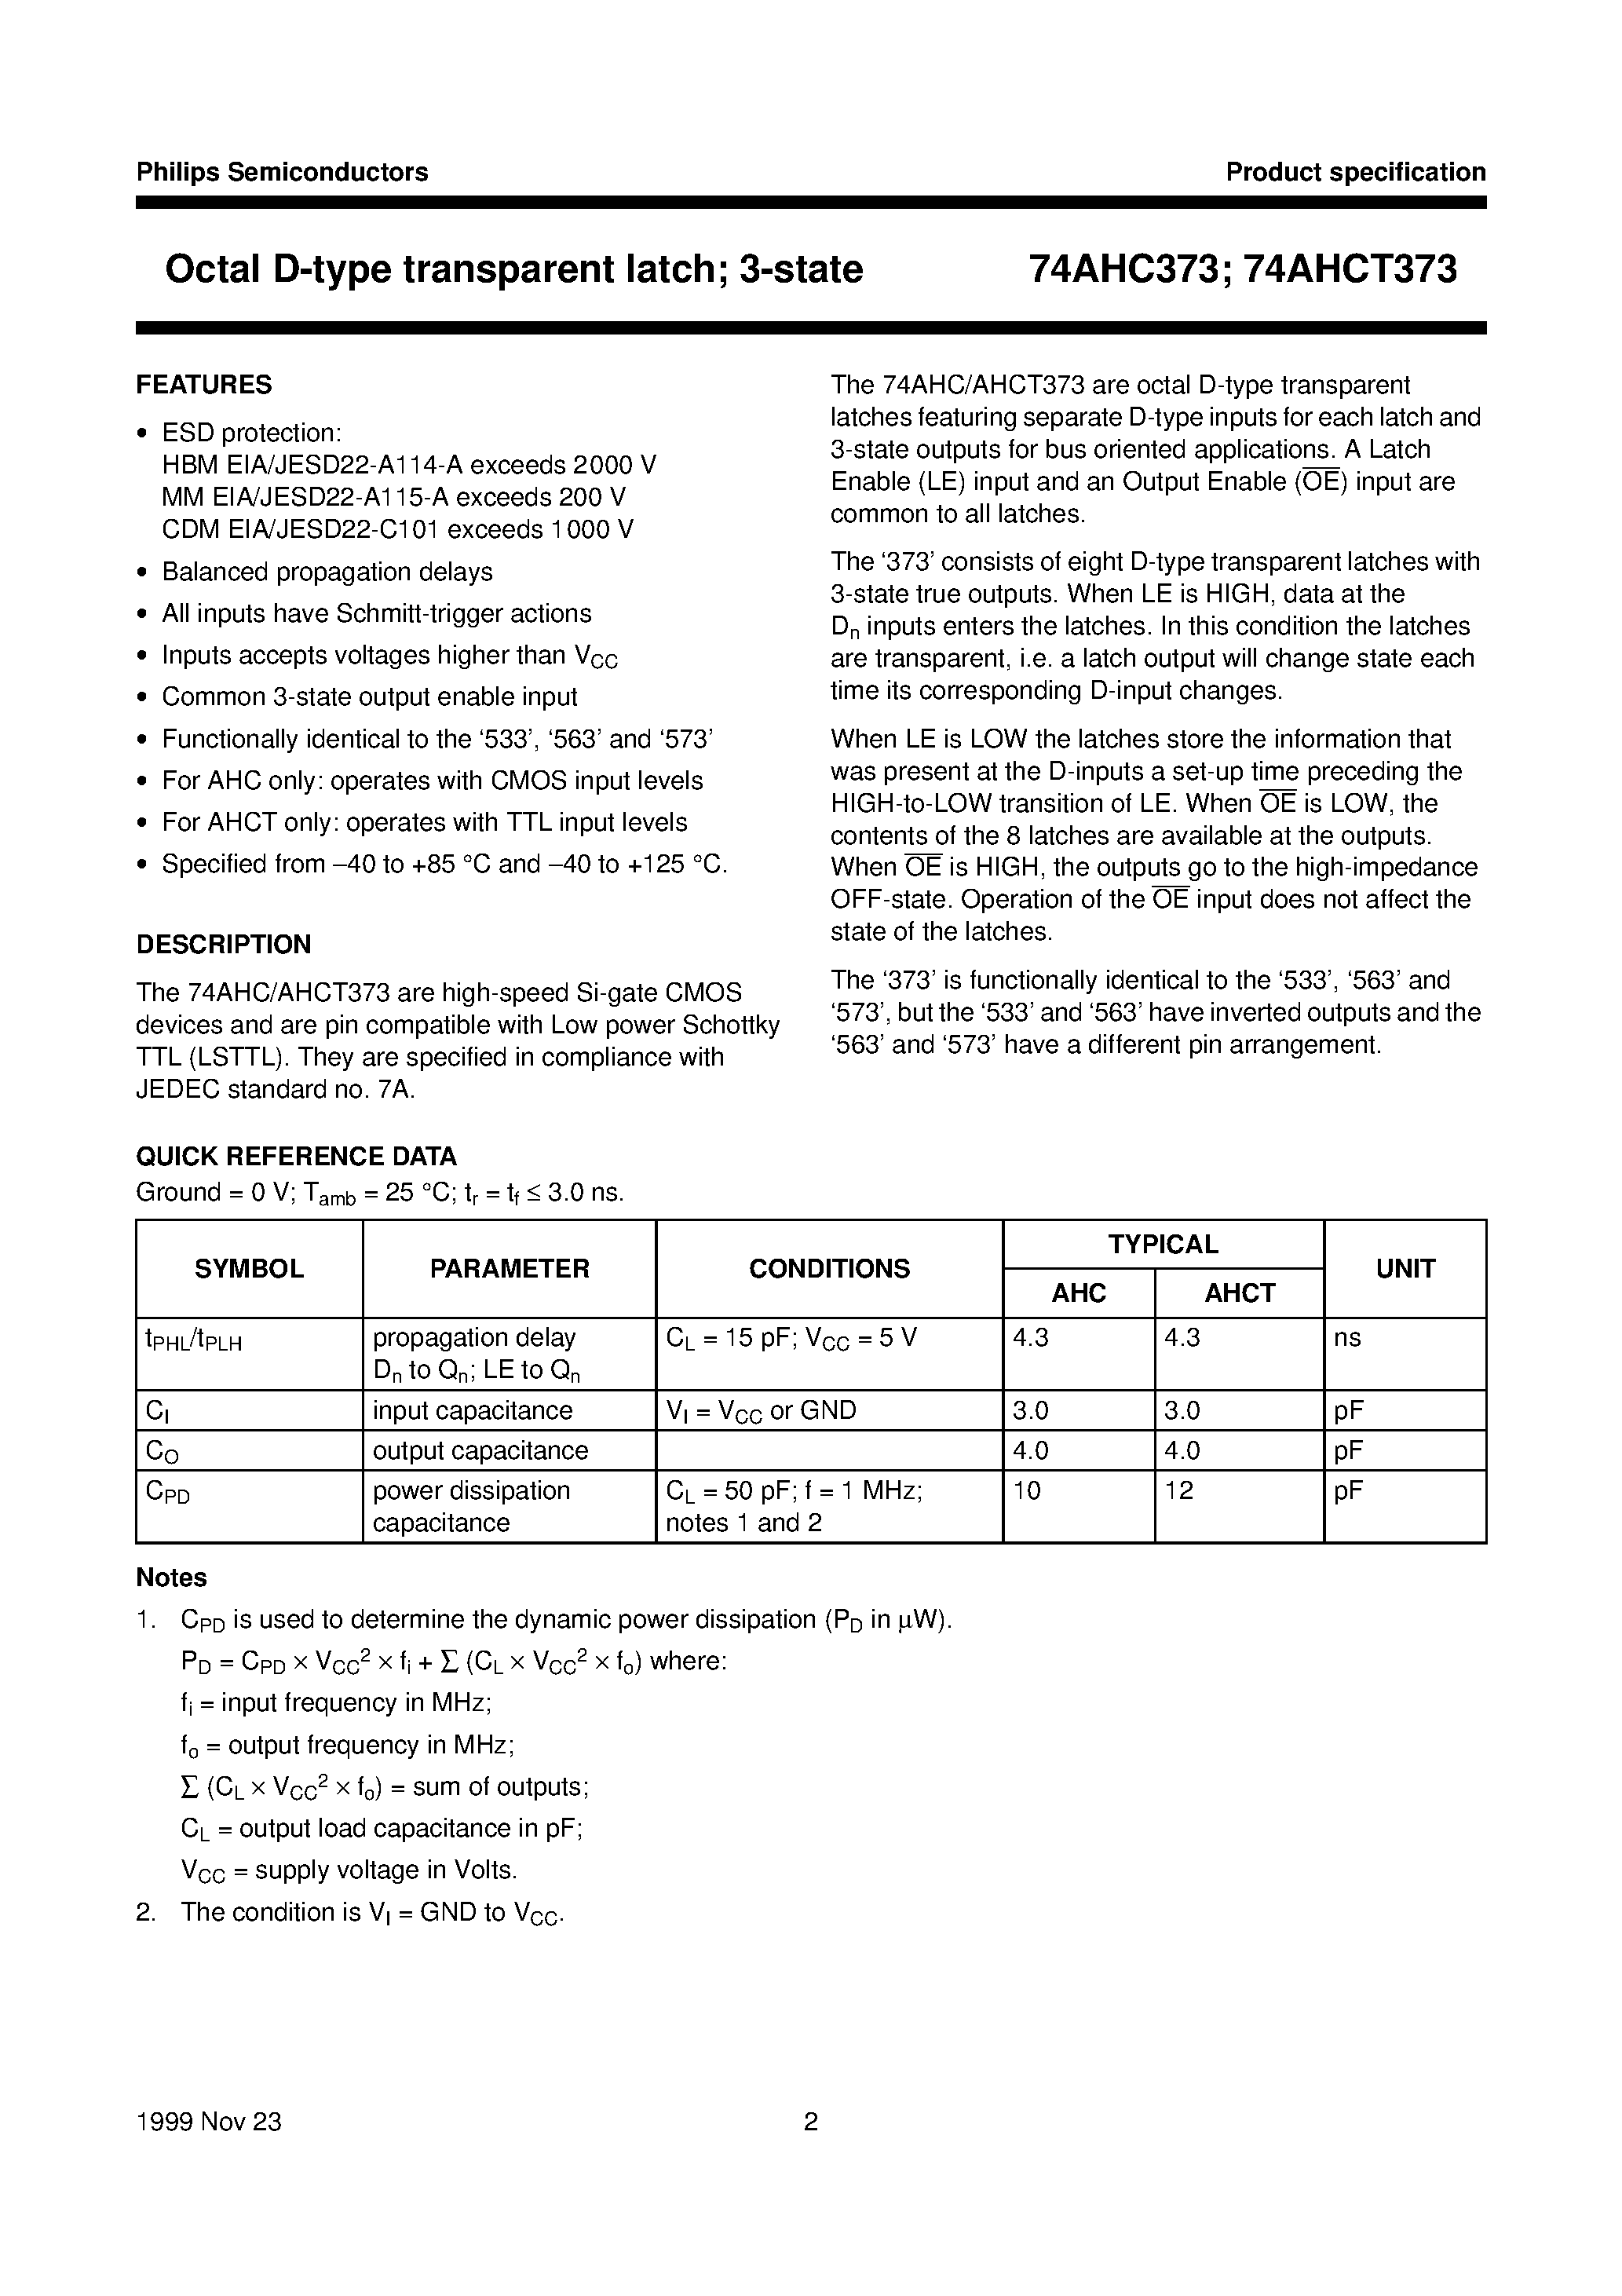 Datasheet 74AHCT373 - Octal D-type transparent latch; 3-state page 2